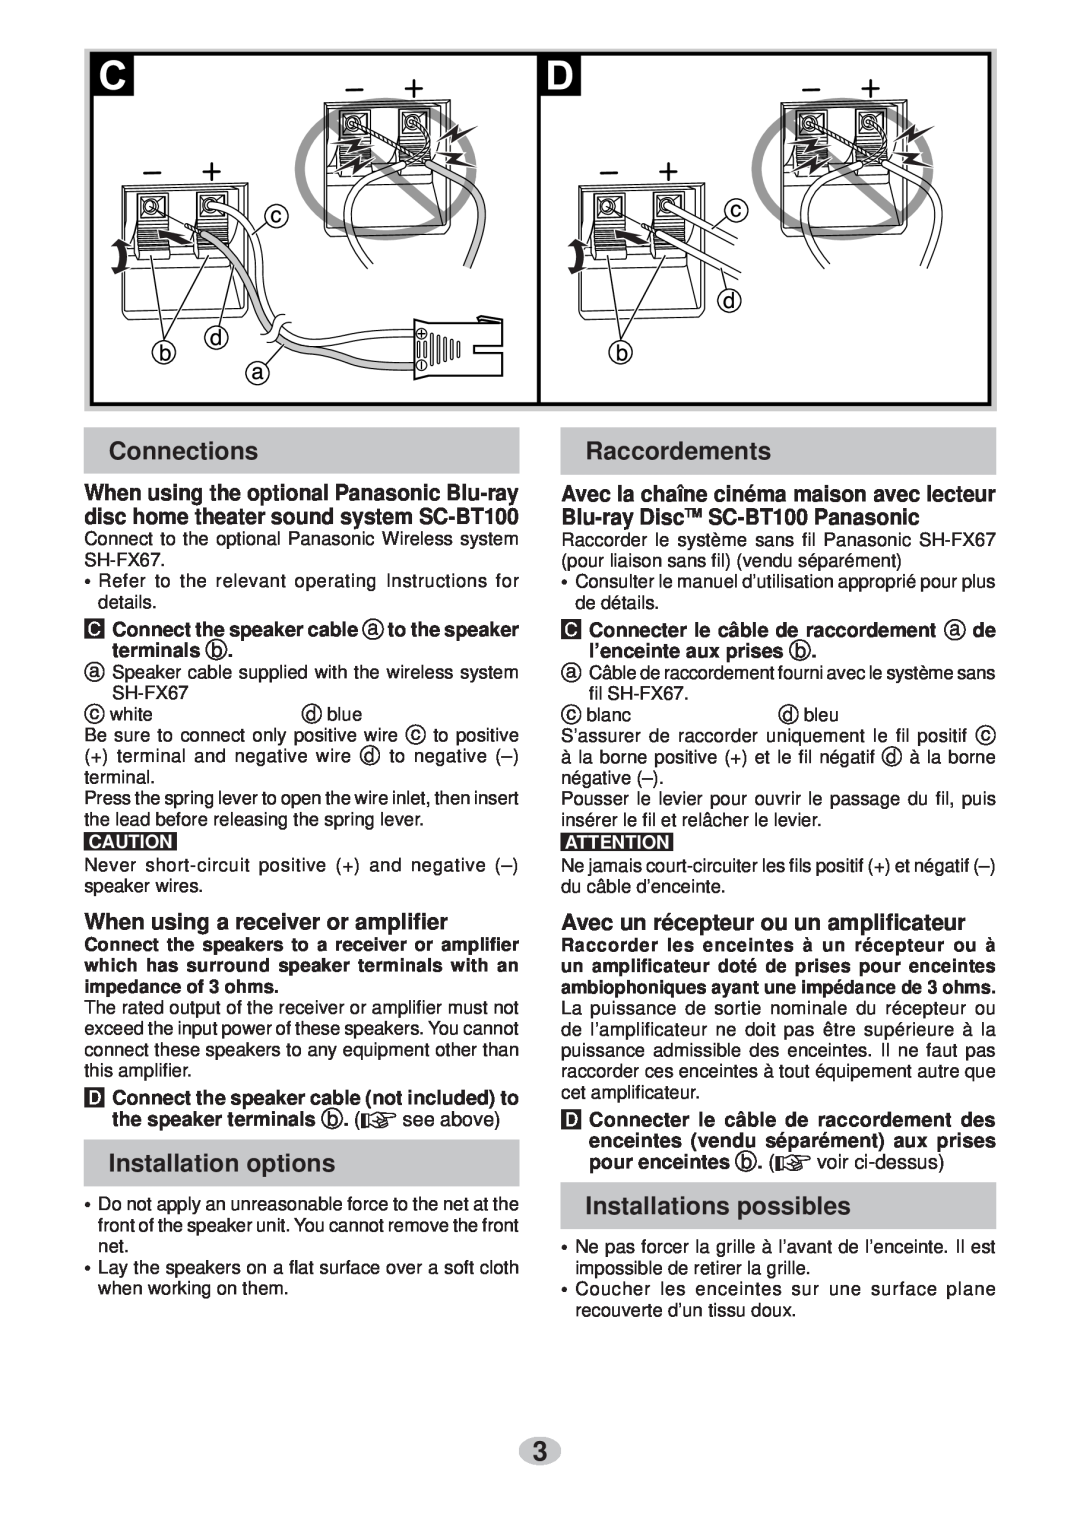 Panasonic SB-HS100A operating instructions Connections, Raccordements, Installation options, Installations possibles 